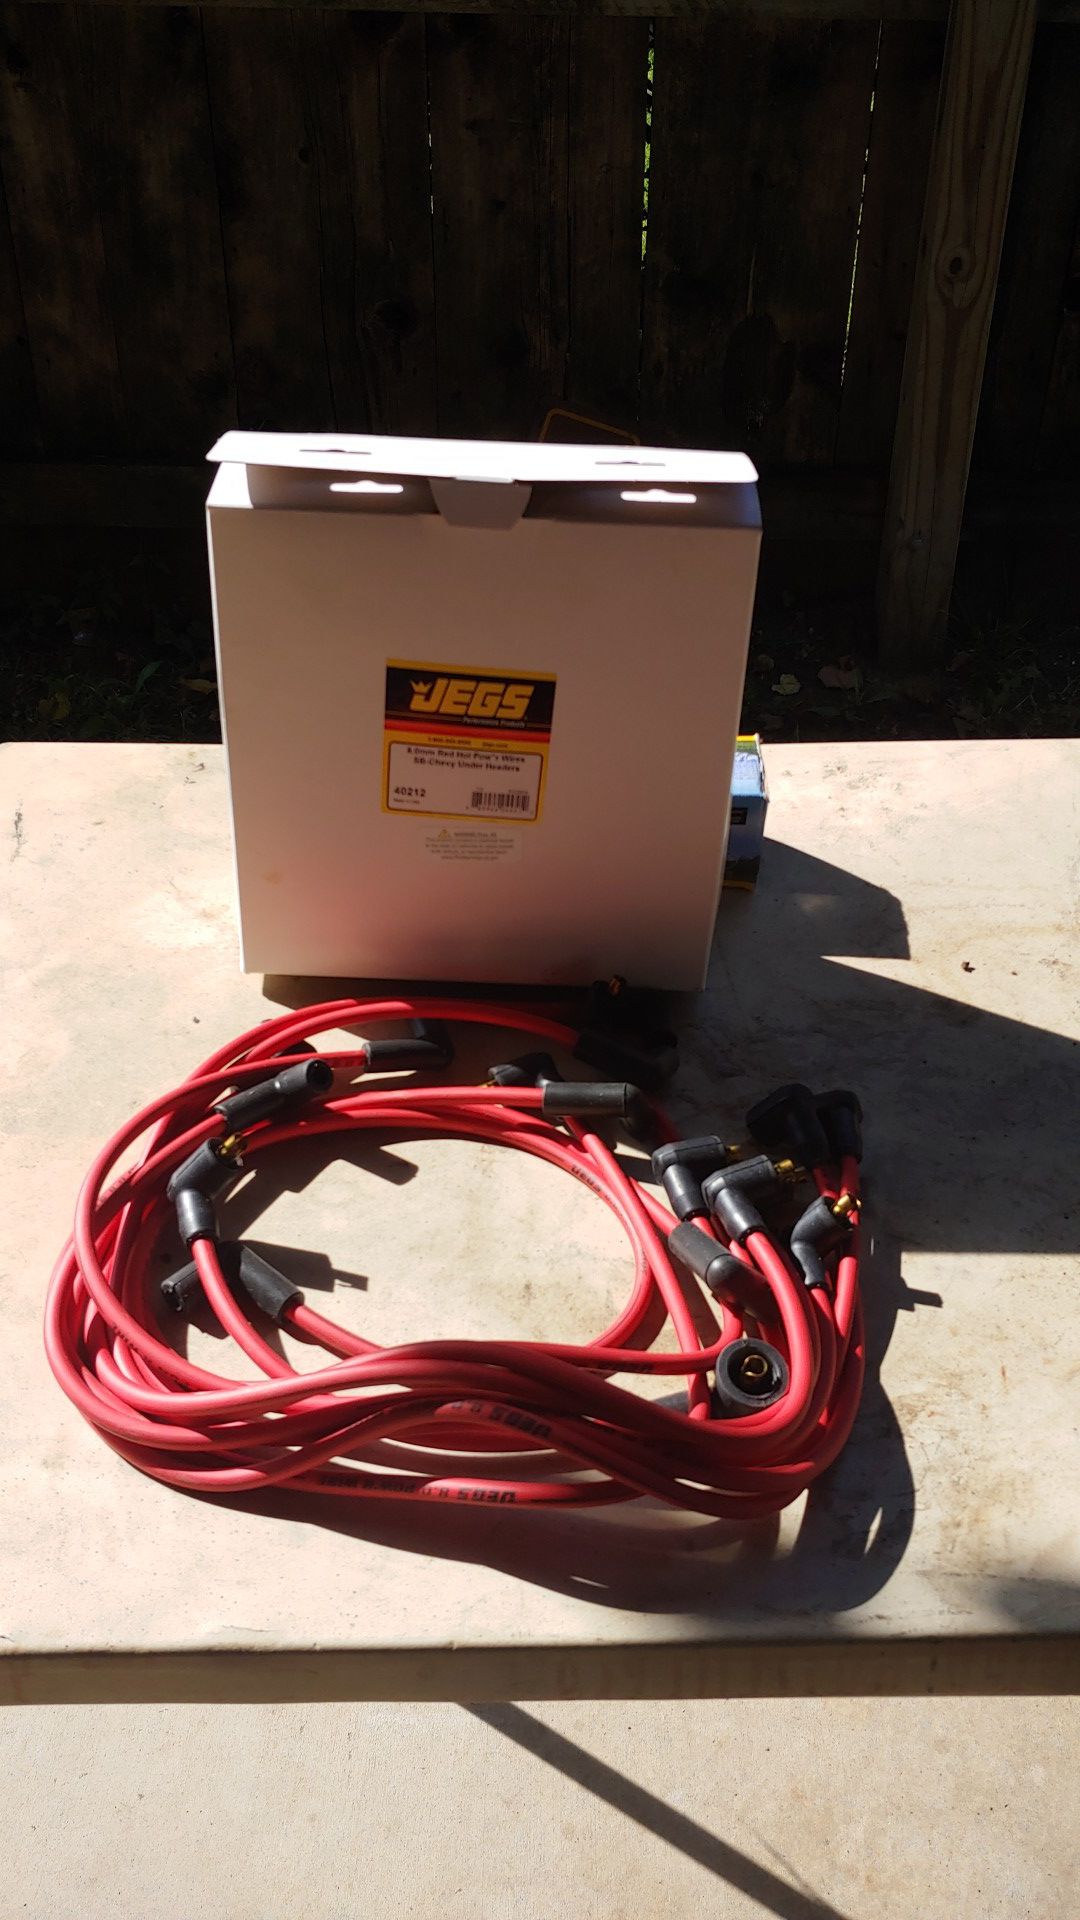 New 8.0 Red hot pow"r wires sb-chevy under headers